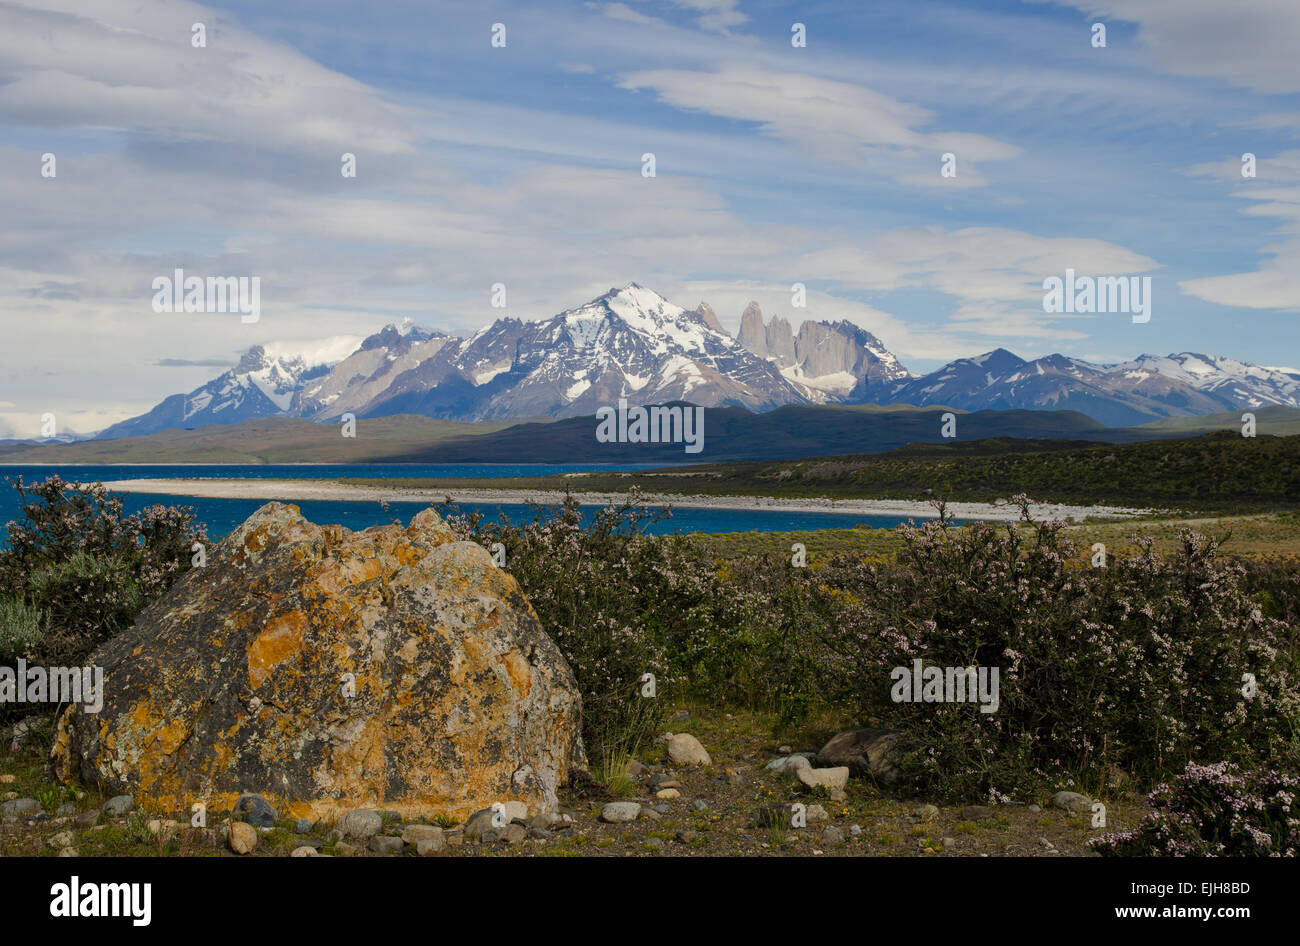 Lago Sarmiento (Sarmiento Lake) in front of the Three Torres in Torres del Paine National Park, Southern Patagonia, Chile Stock Photo